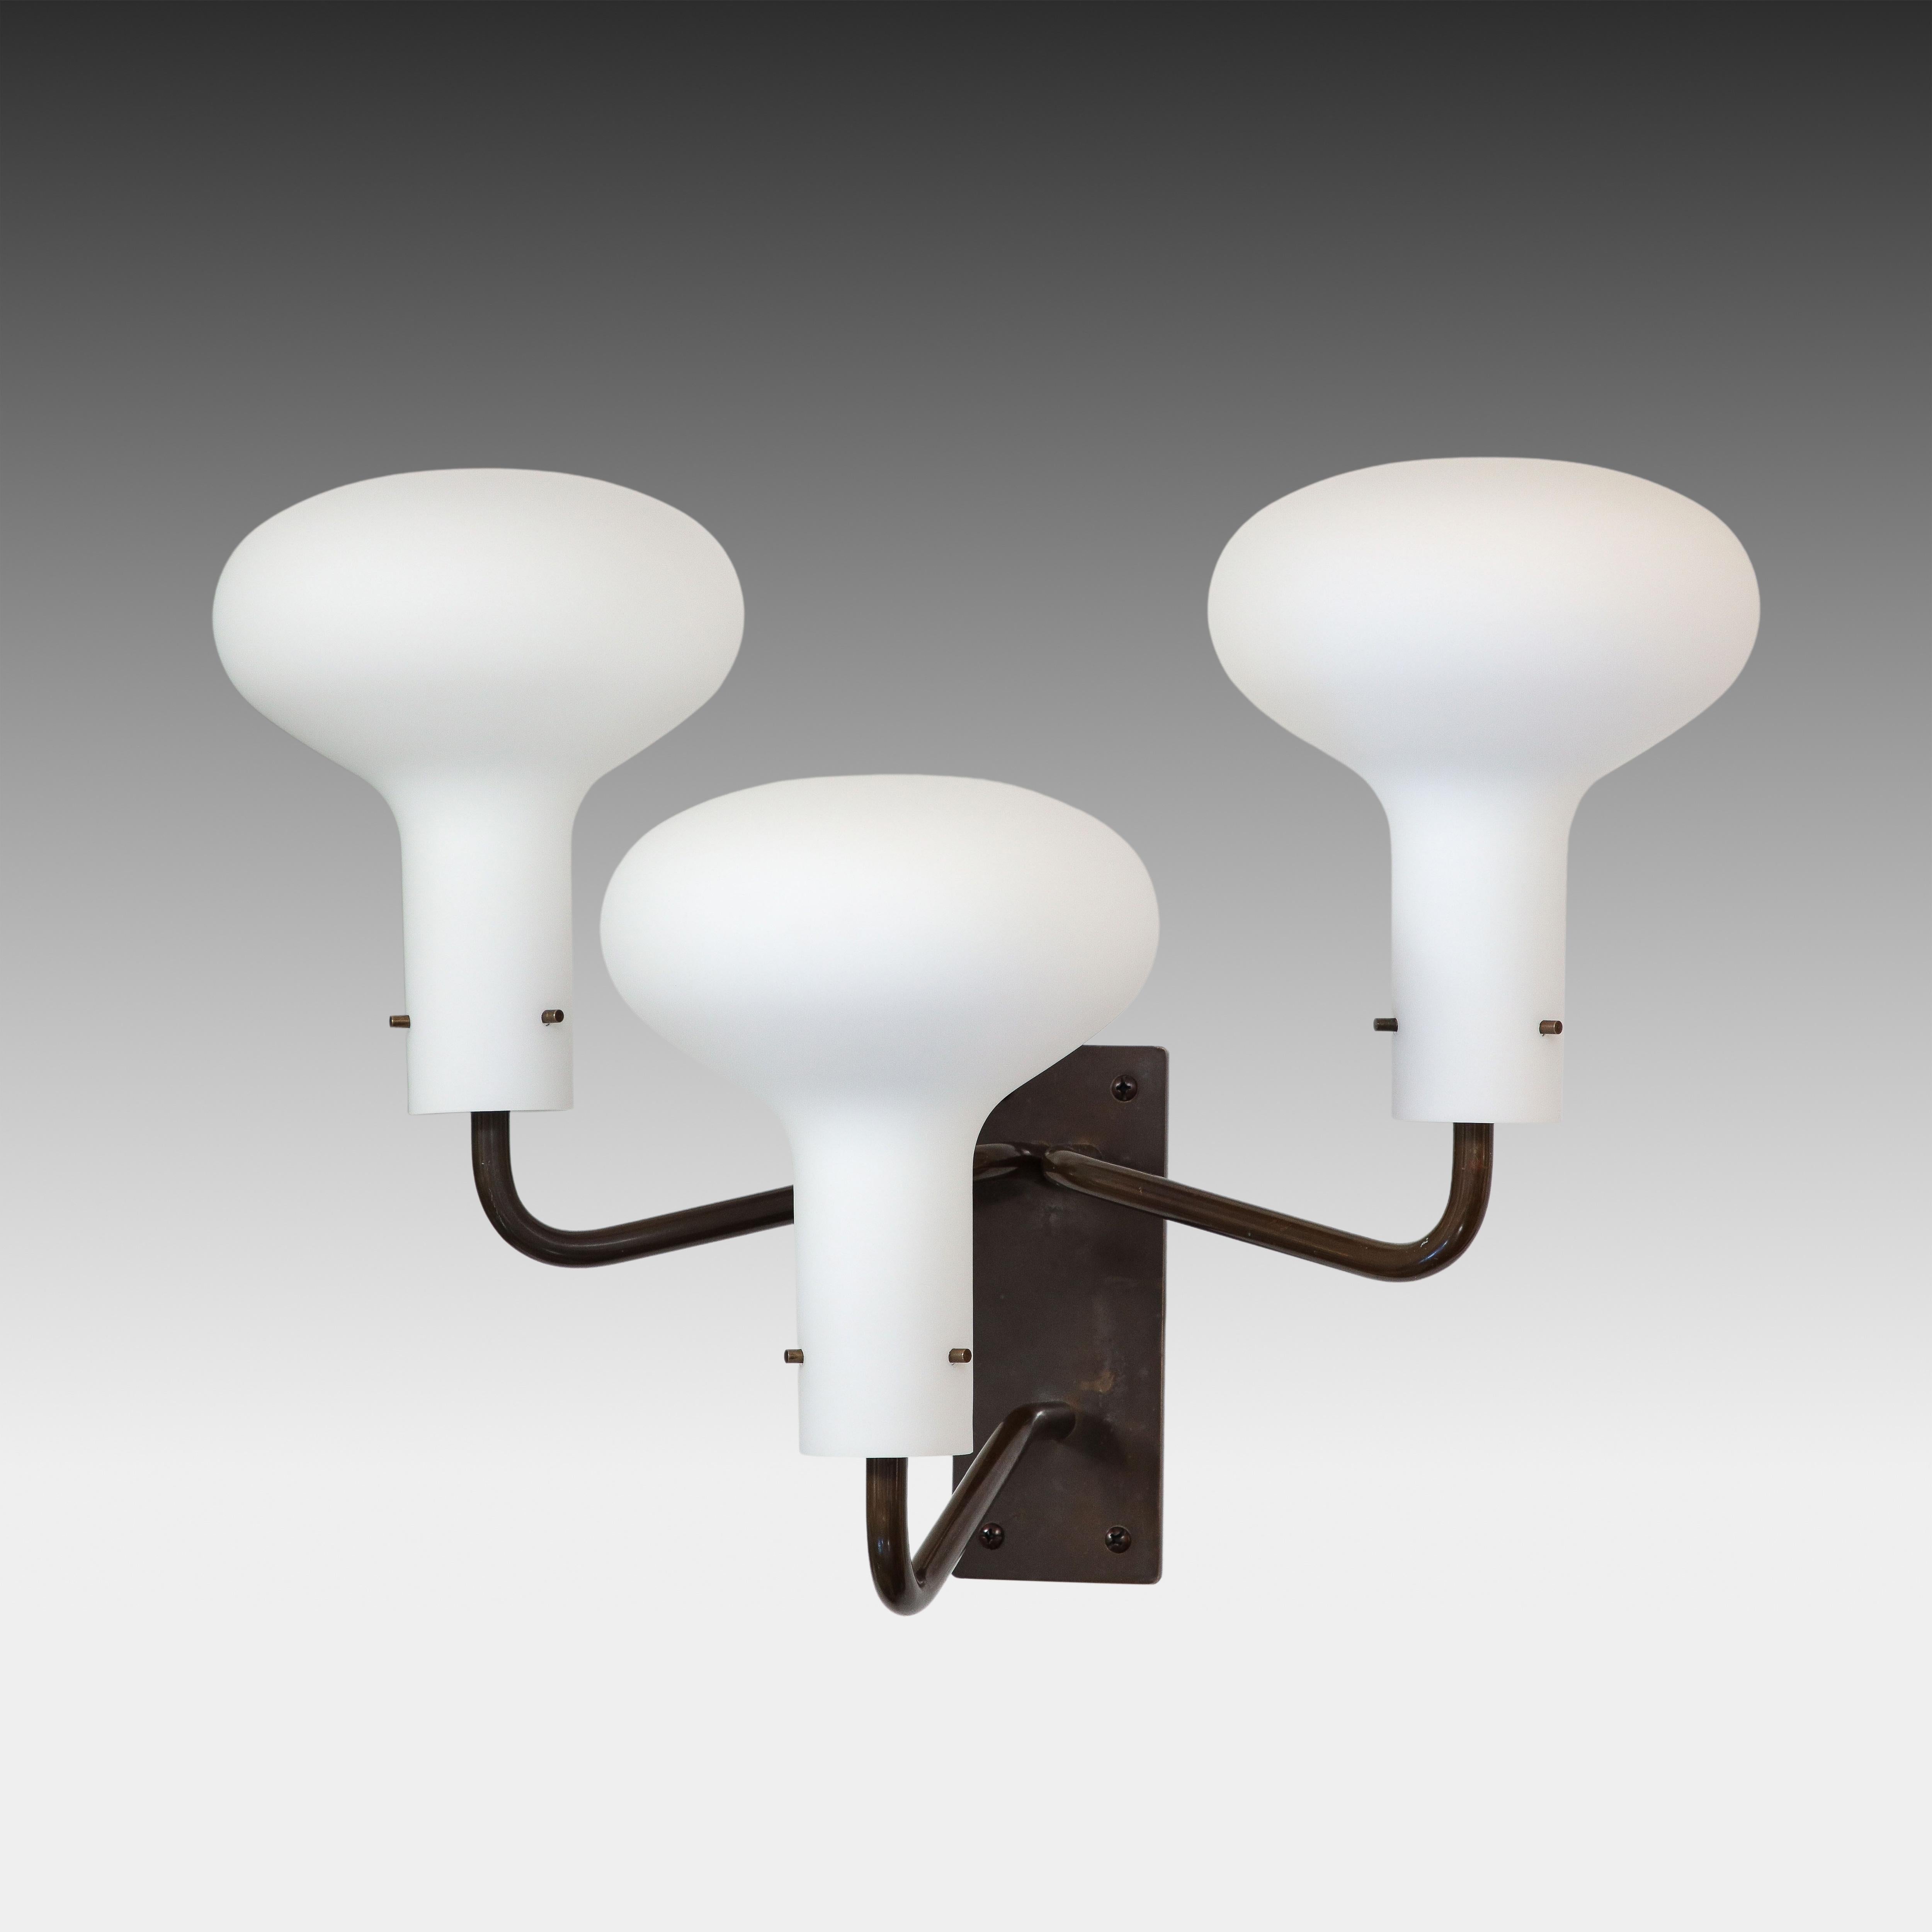 Ignazio Gardella for Azucena Pair of Wall Lights Model LP12, Italy, 1950s For Sale 1